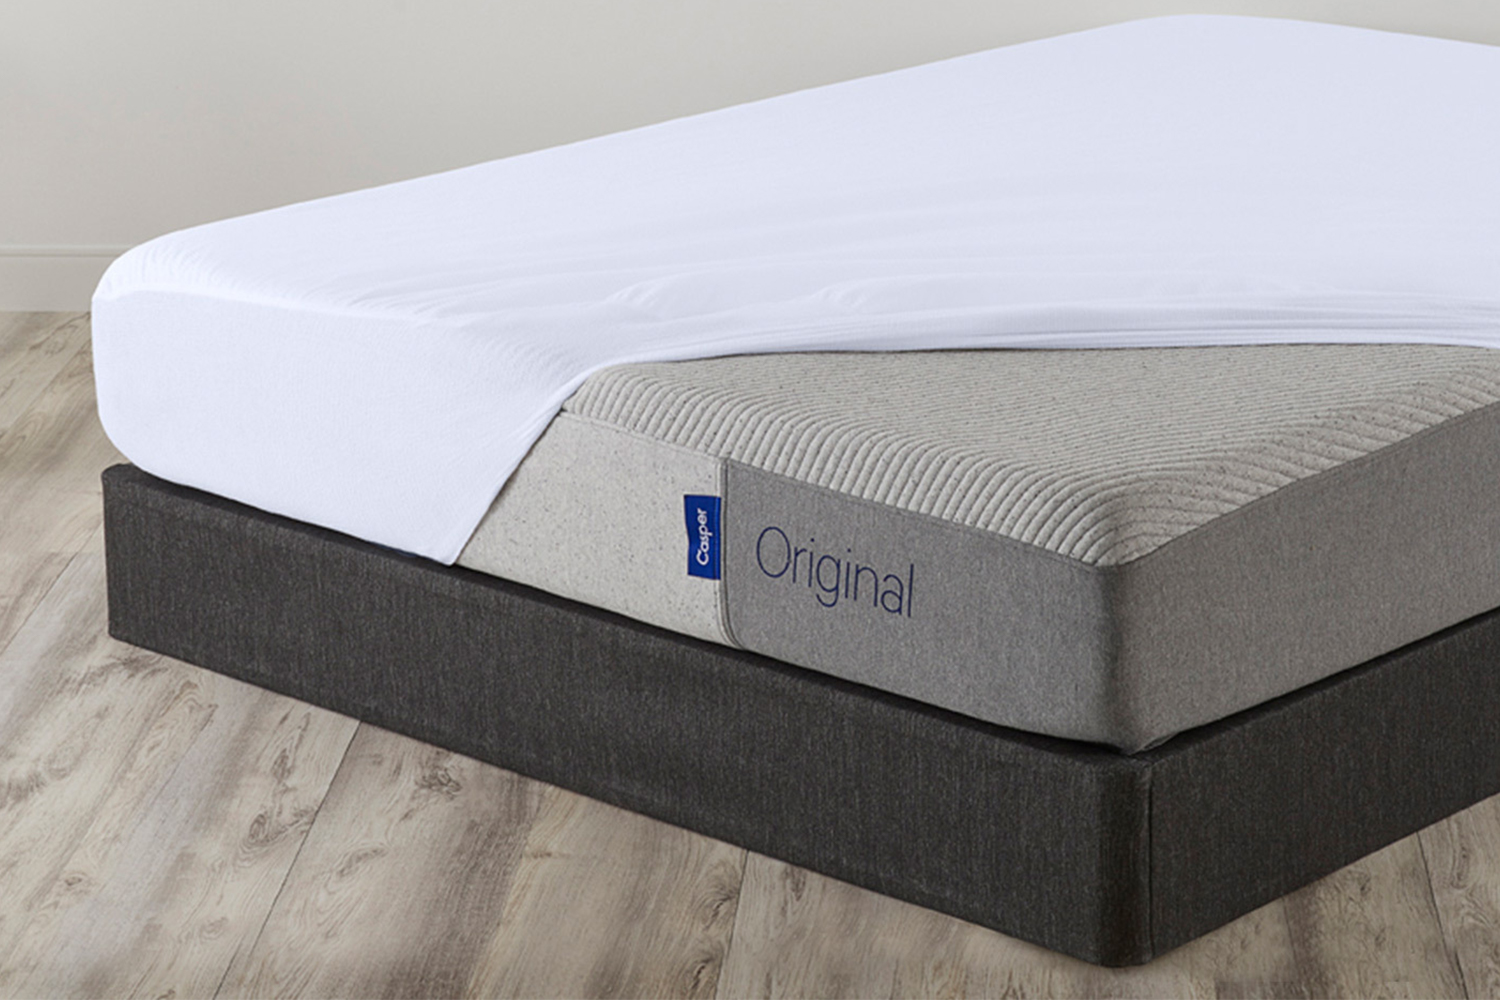 A Casper Original mattress with a mattress protector half on and sitting on a grey foundation. This bundle is on sale for Cyber Week 2021.